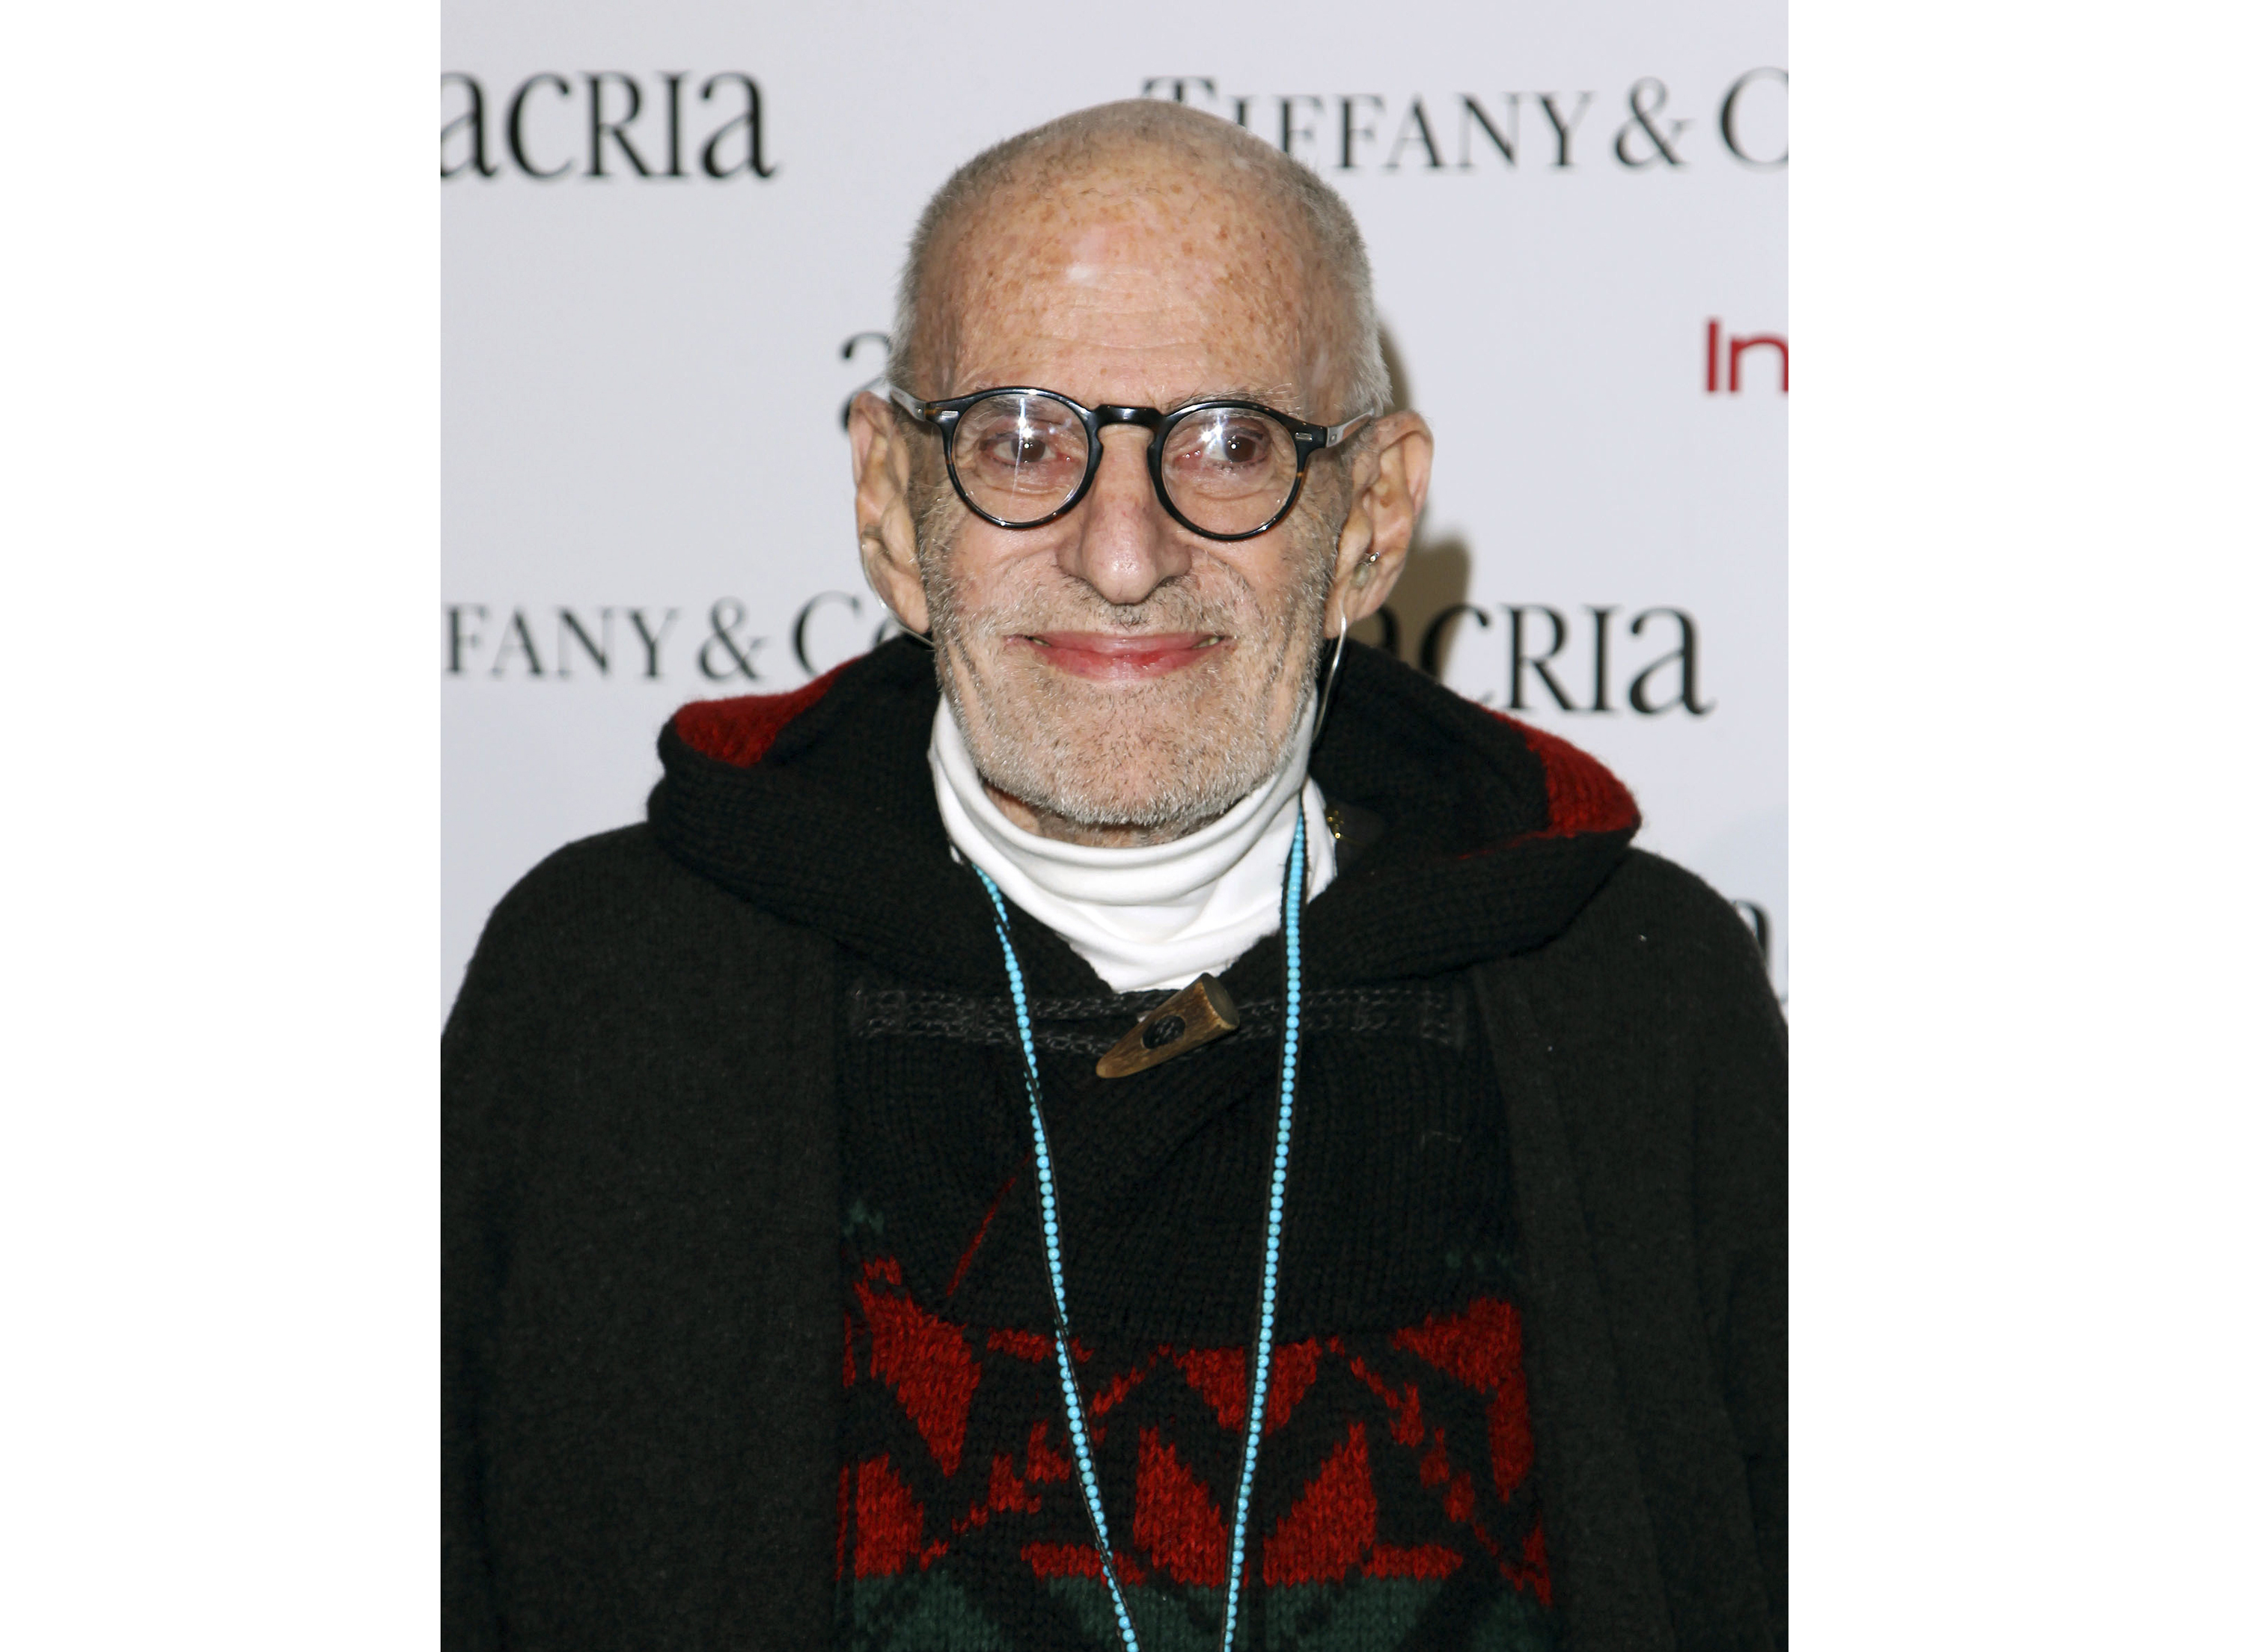 FILE - In this Dec. 10, 2014 file photo, playwright Larry Kramer attends Acria's 19th Annual Holiday Dinner Benefit in New York. Kramer, the playwright whose angry voice and pen raised theatergoersu2019 consciousness about AIDS and roused thousands to militant protests in the early years of the epidemic, died Wednesday, May 27, 2020 in Manhattan of pneumonia. He was 84. Photo: AP